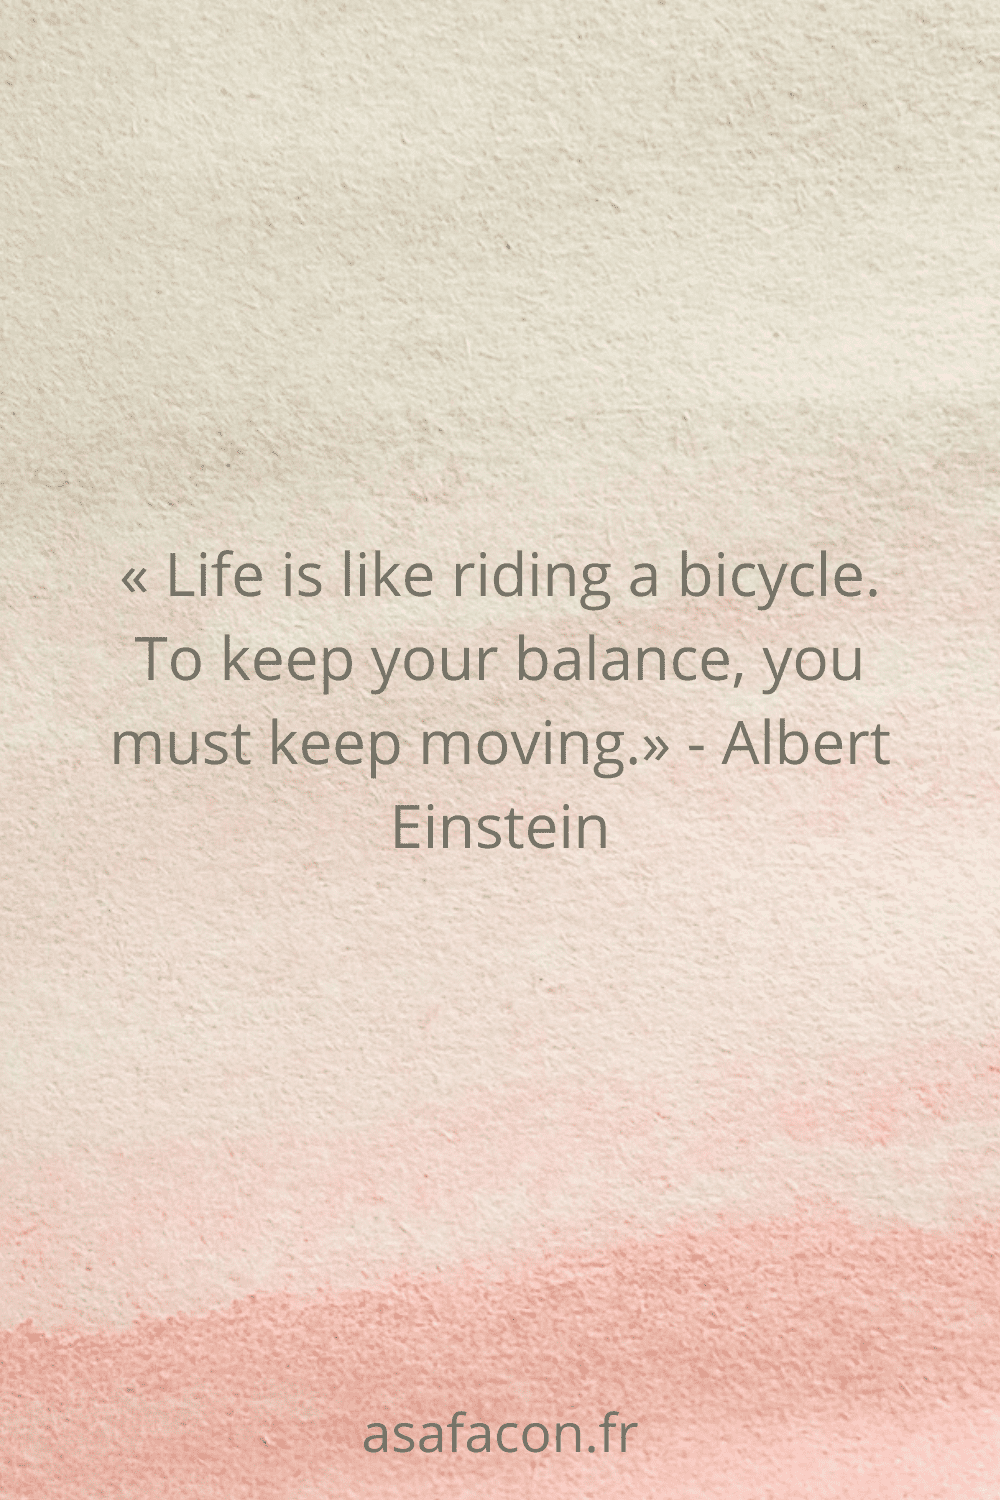 « Life is like riding a bicycle. To keep your balance, you must keep moving.» - Albert Einstein